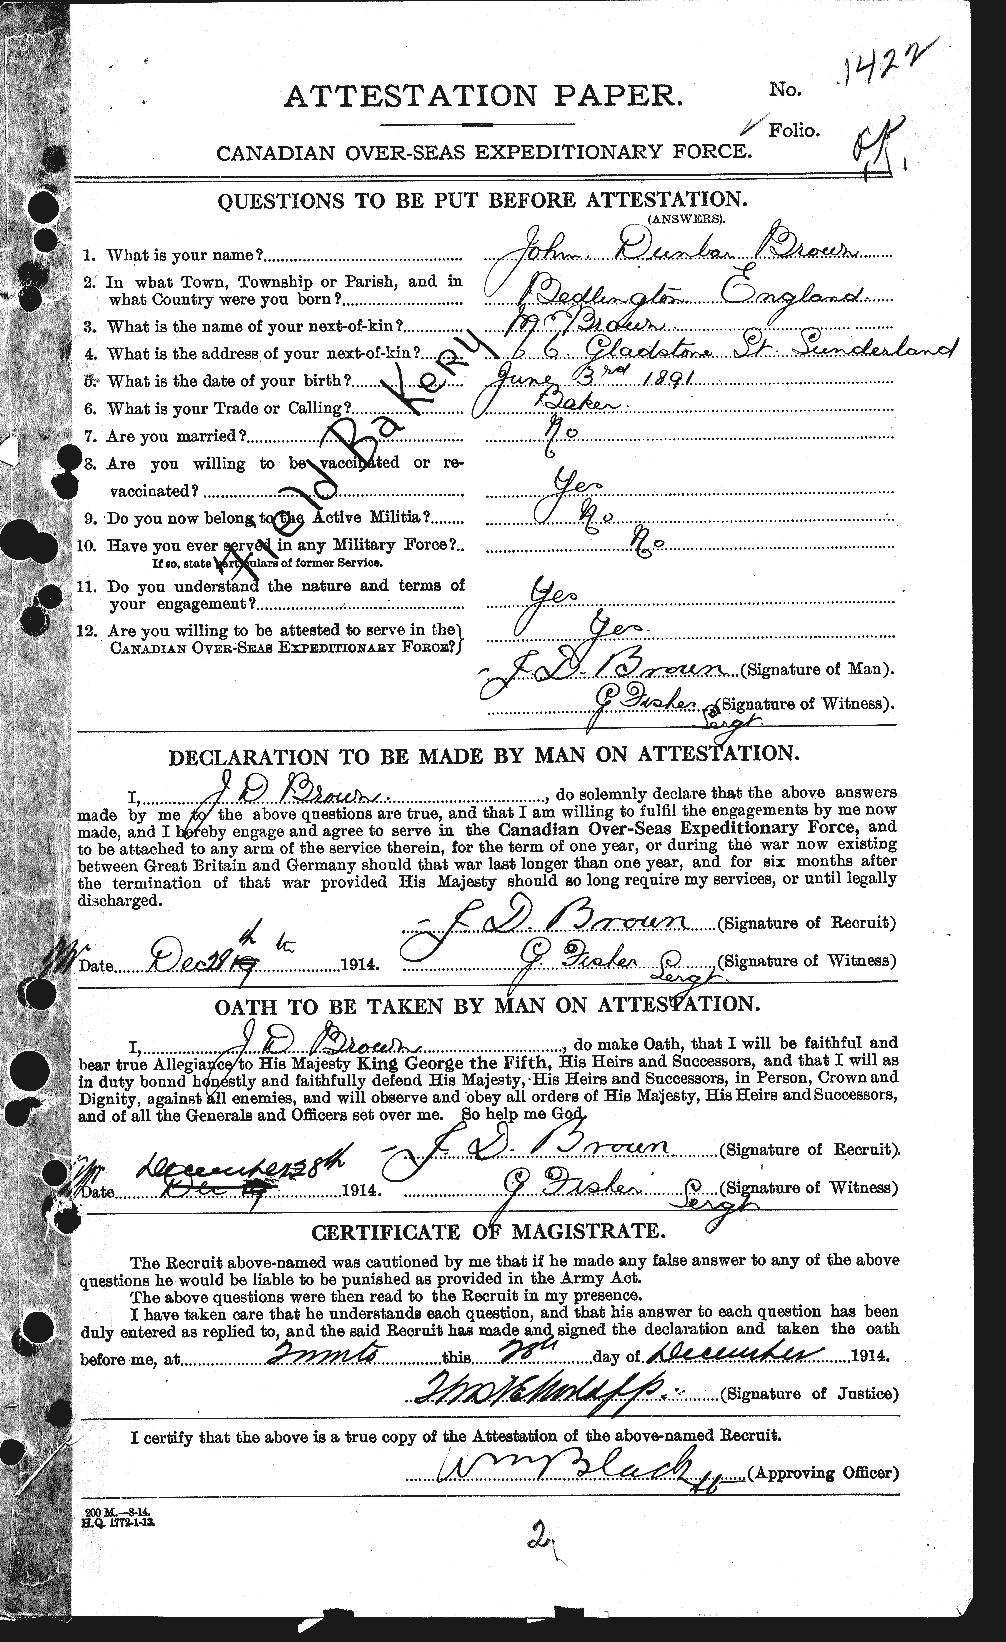 Personnel Records of the First World War - CEF 264586a